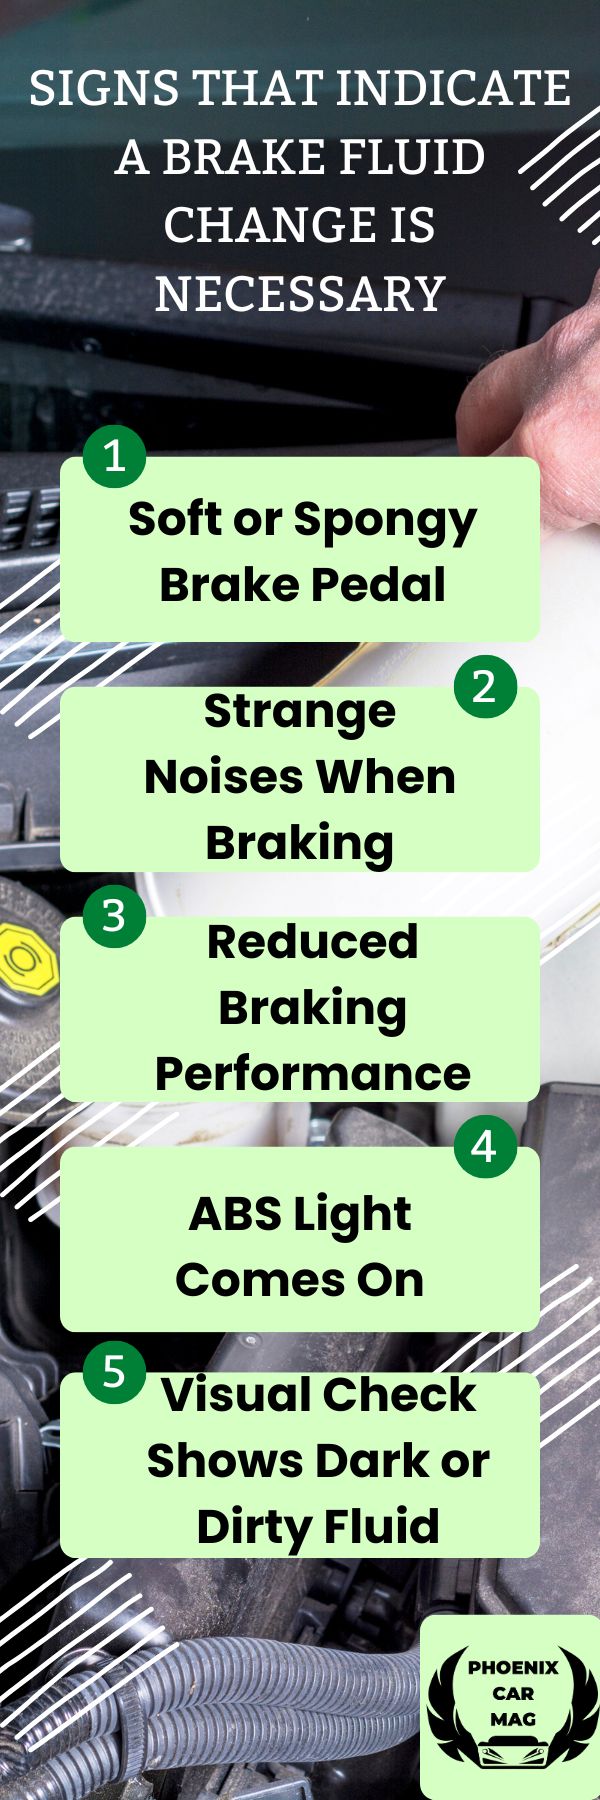 an infographic about Signs That Indicate a Brake Fluid Change is Necessary